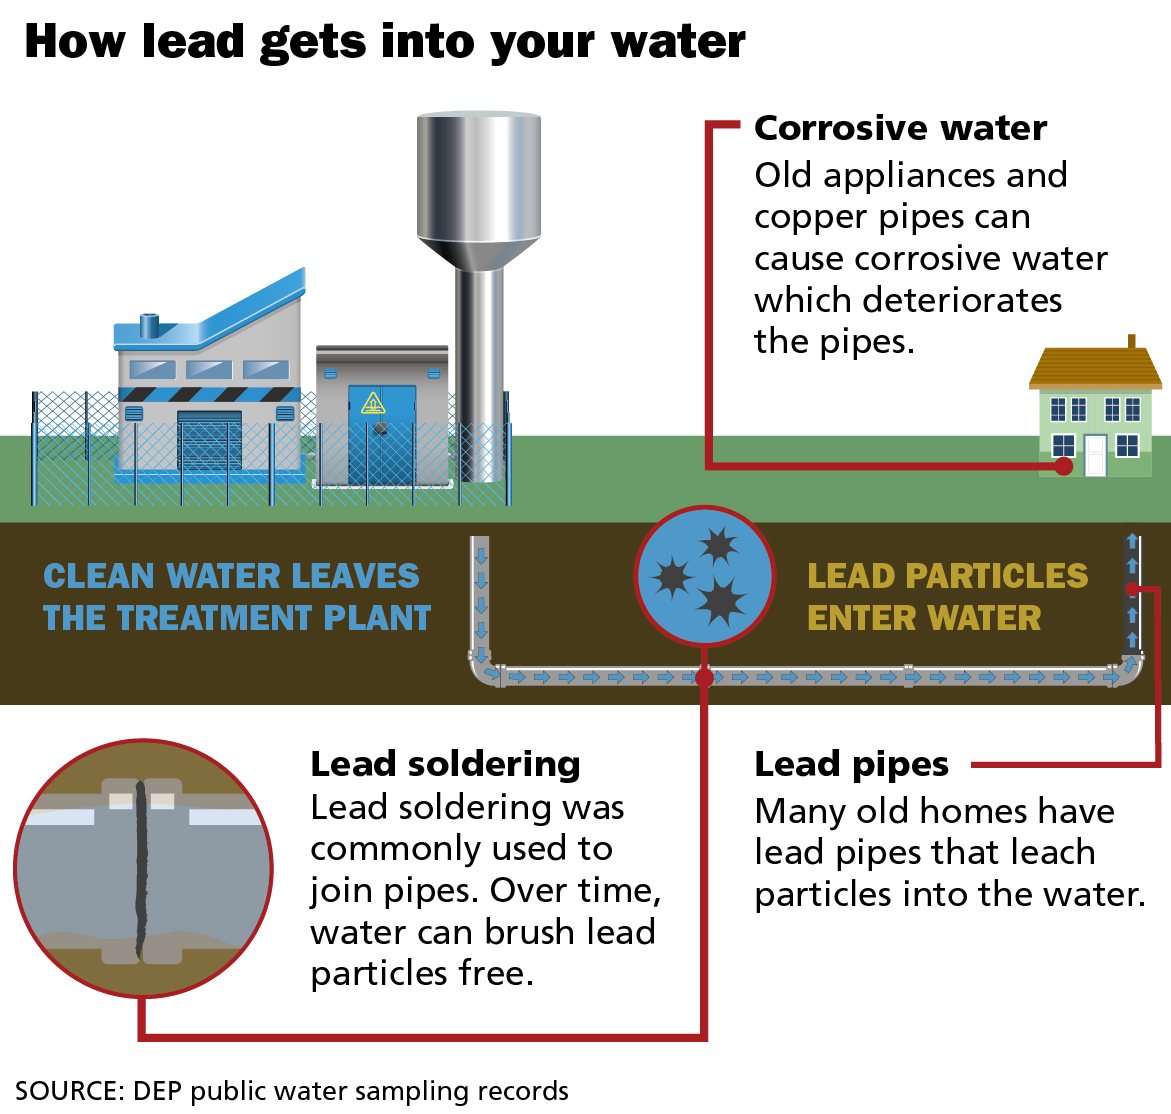 Diagram showing how lead gets into water